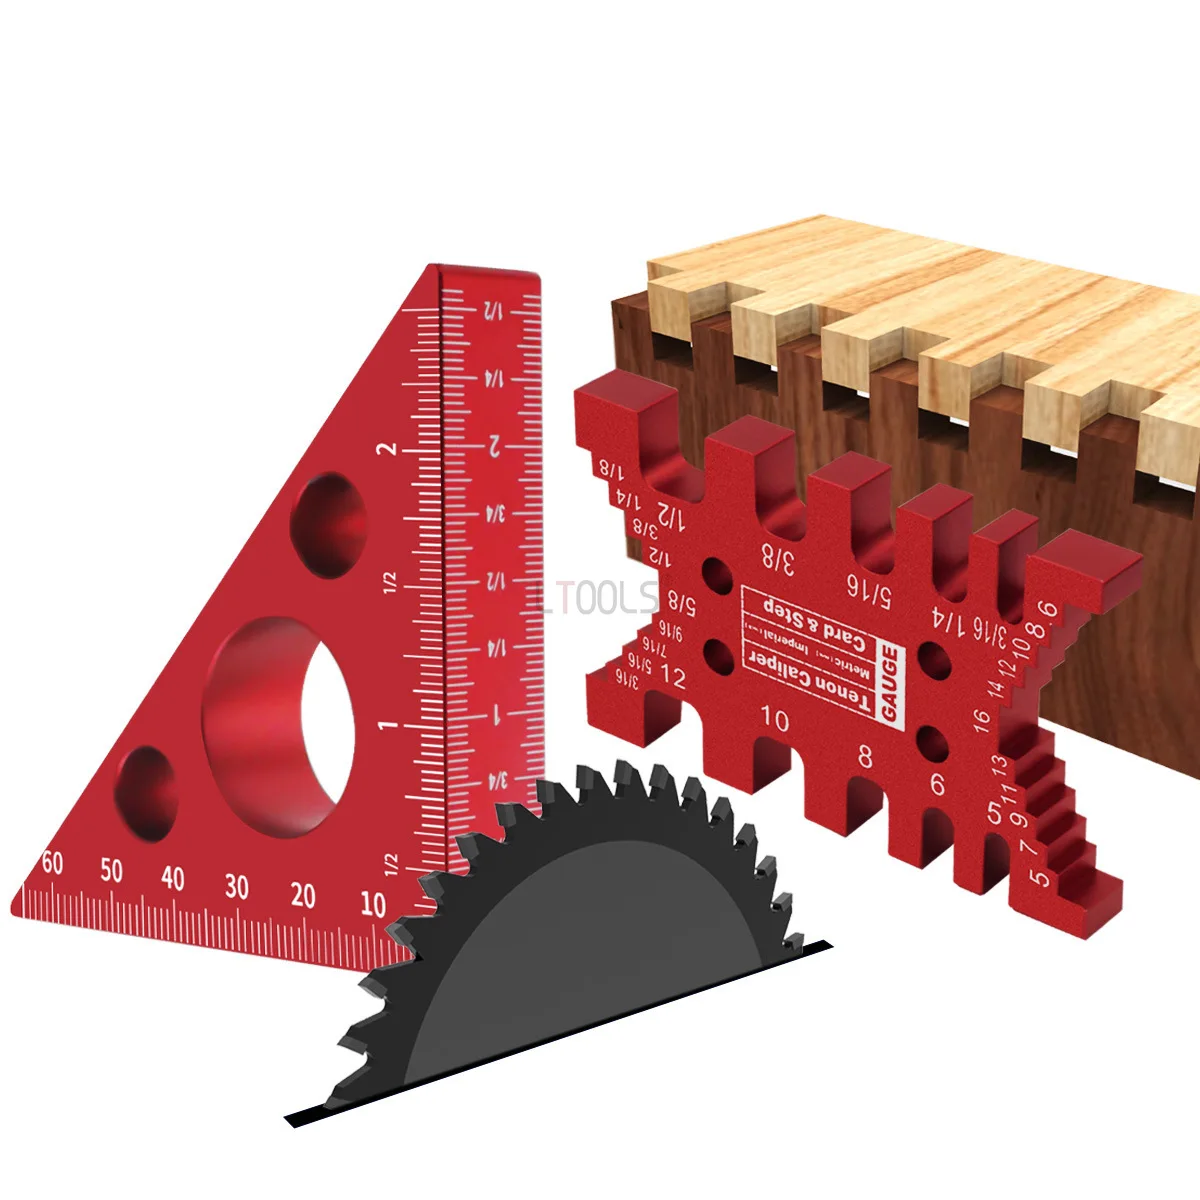 Dovetail Jig Tenon Caliper+Thickened Heigh 45/90° Scale Imperial Metric Degree Aluminum Alloy Triangle Ruler Measuring Tool dovetail jig tenon caliper thickened heigh 45 90° scale imperial metric degree aluminum alloy triangle ruler measuring tool